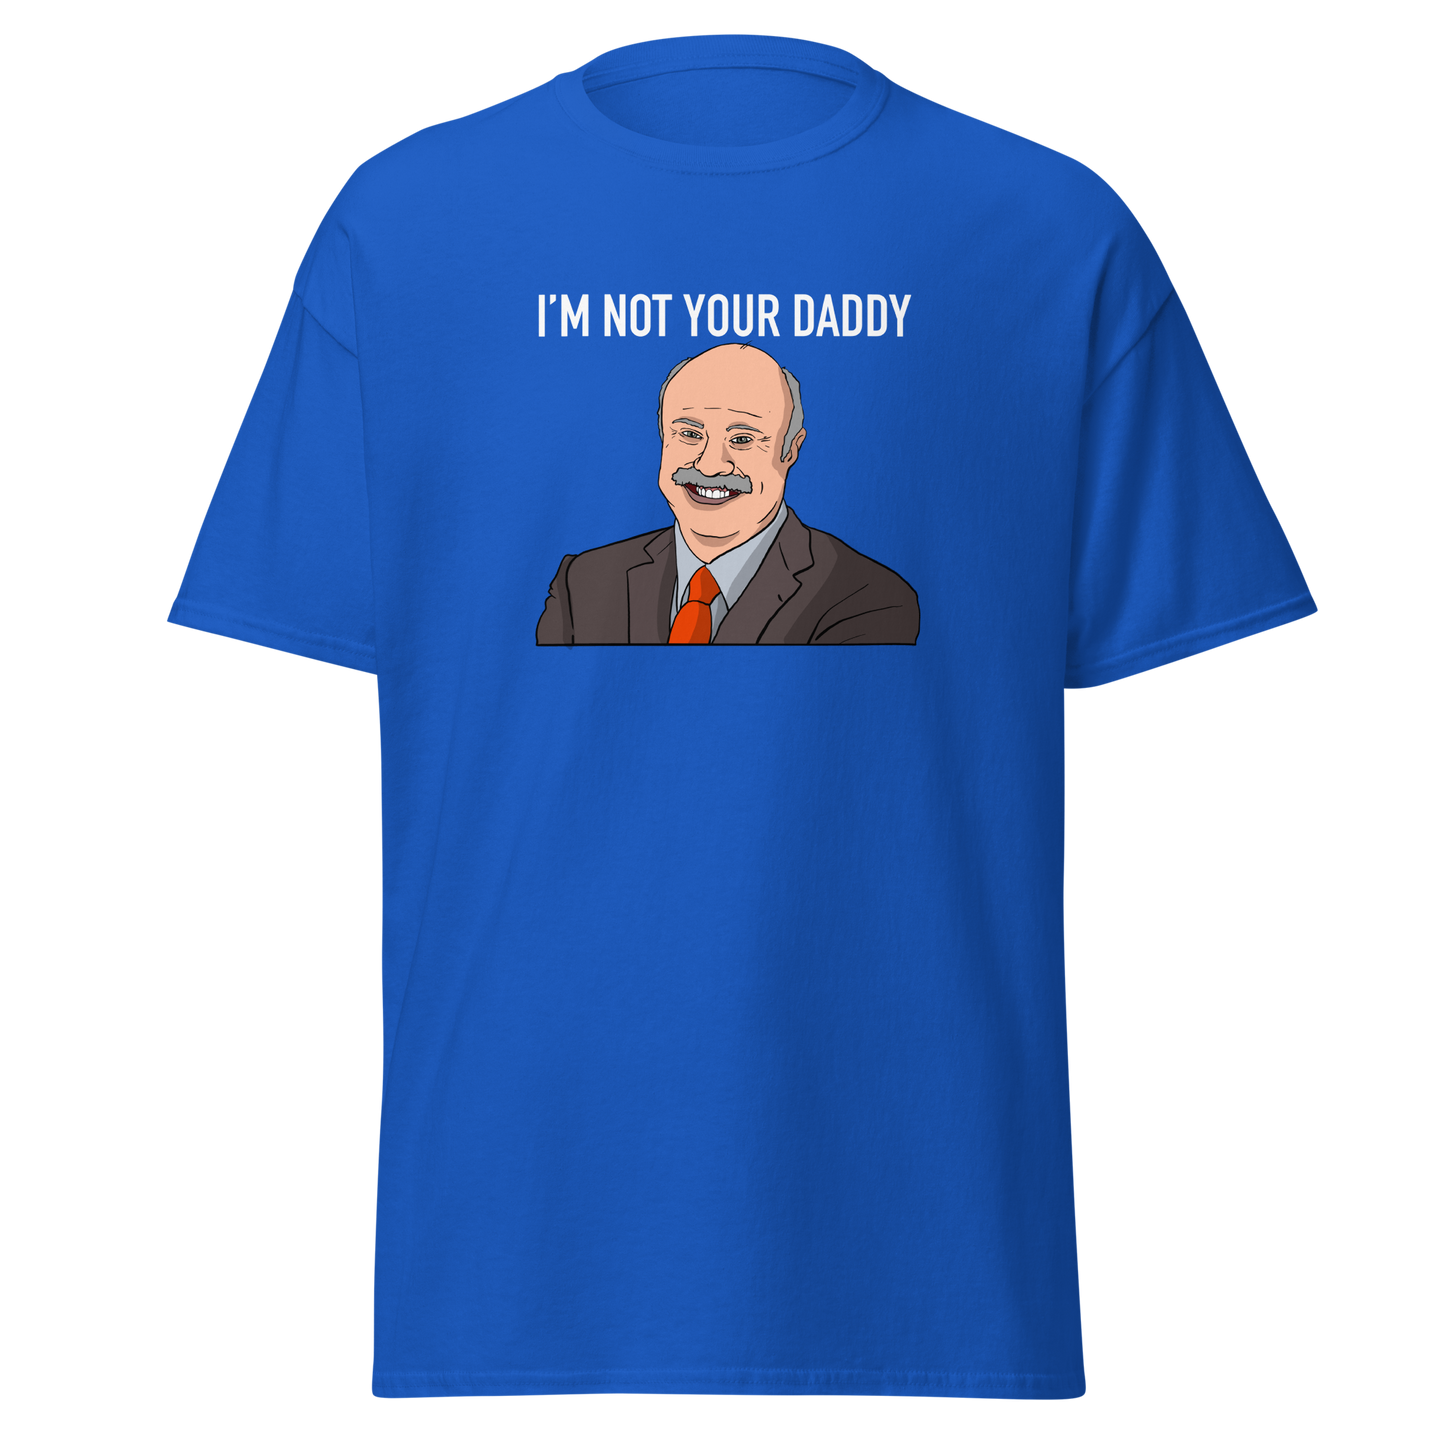 Daddy Phil T-Shirt